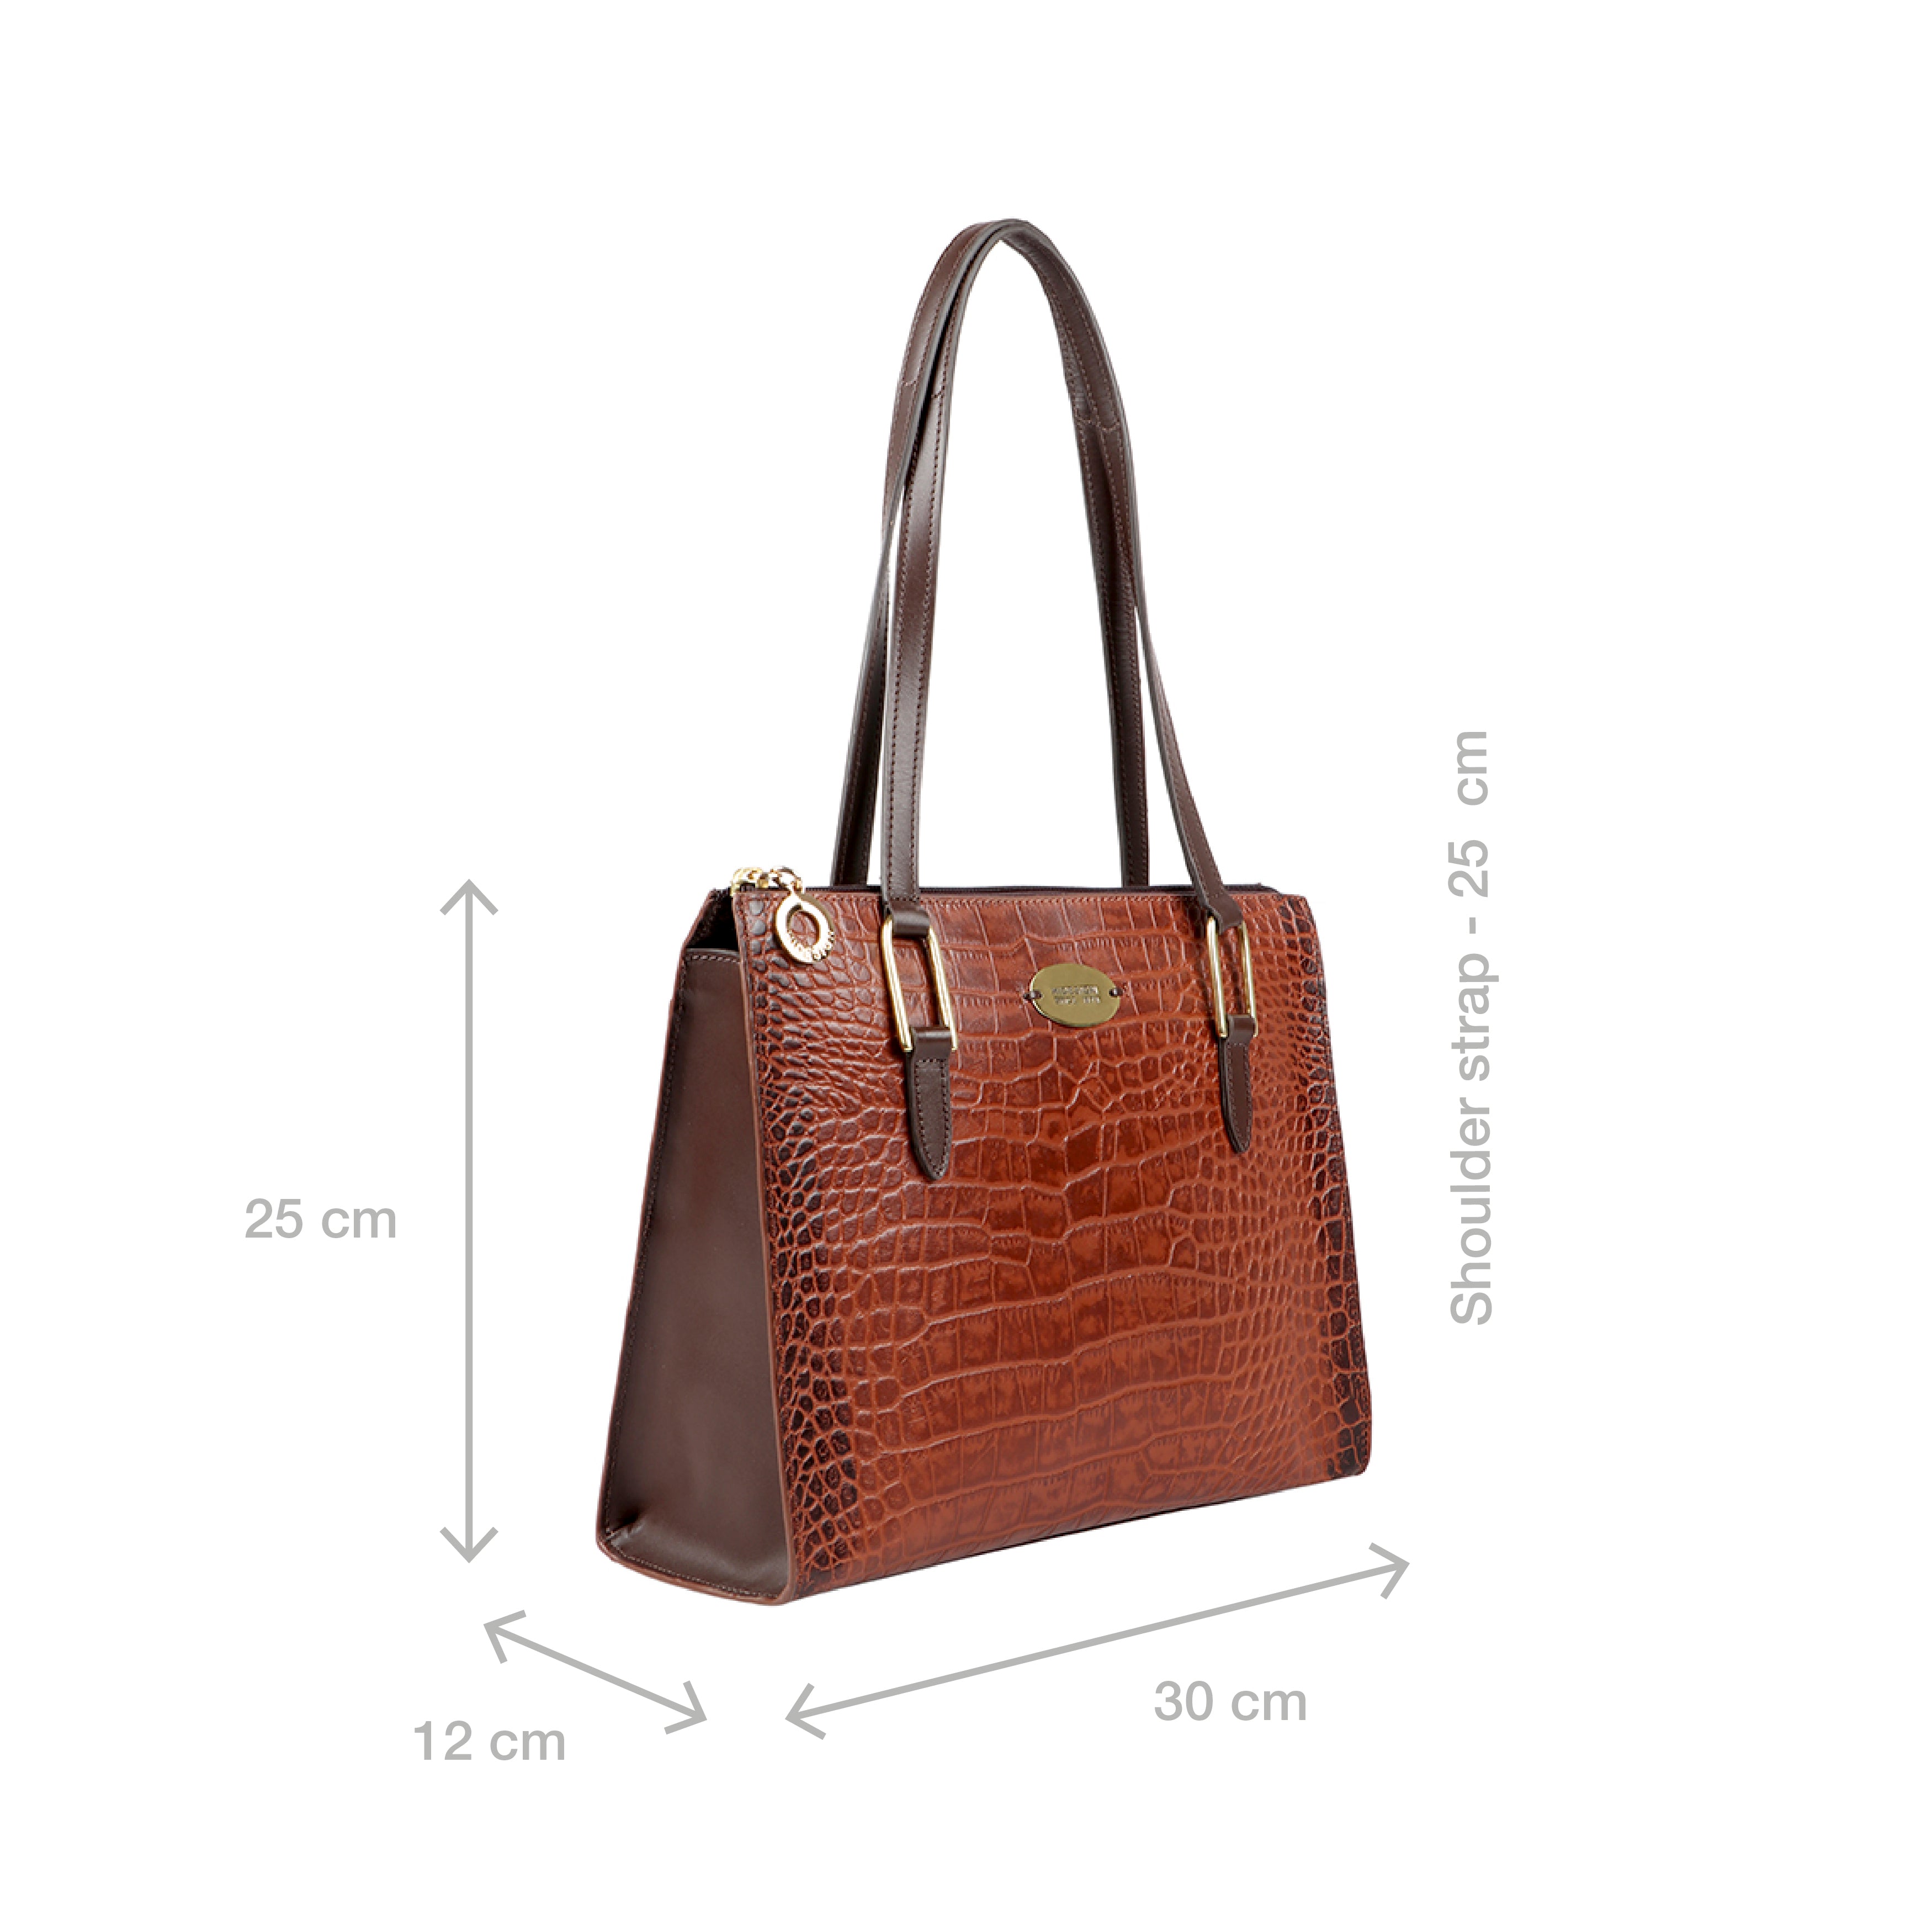 Hidesign Bags & Handbags outlet - Women - 1800 products on sale